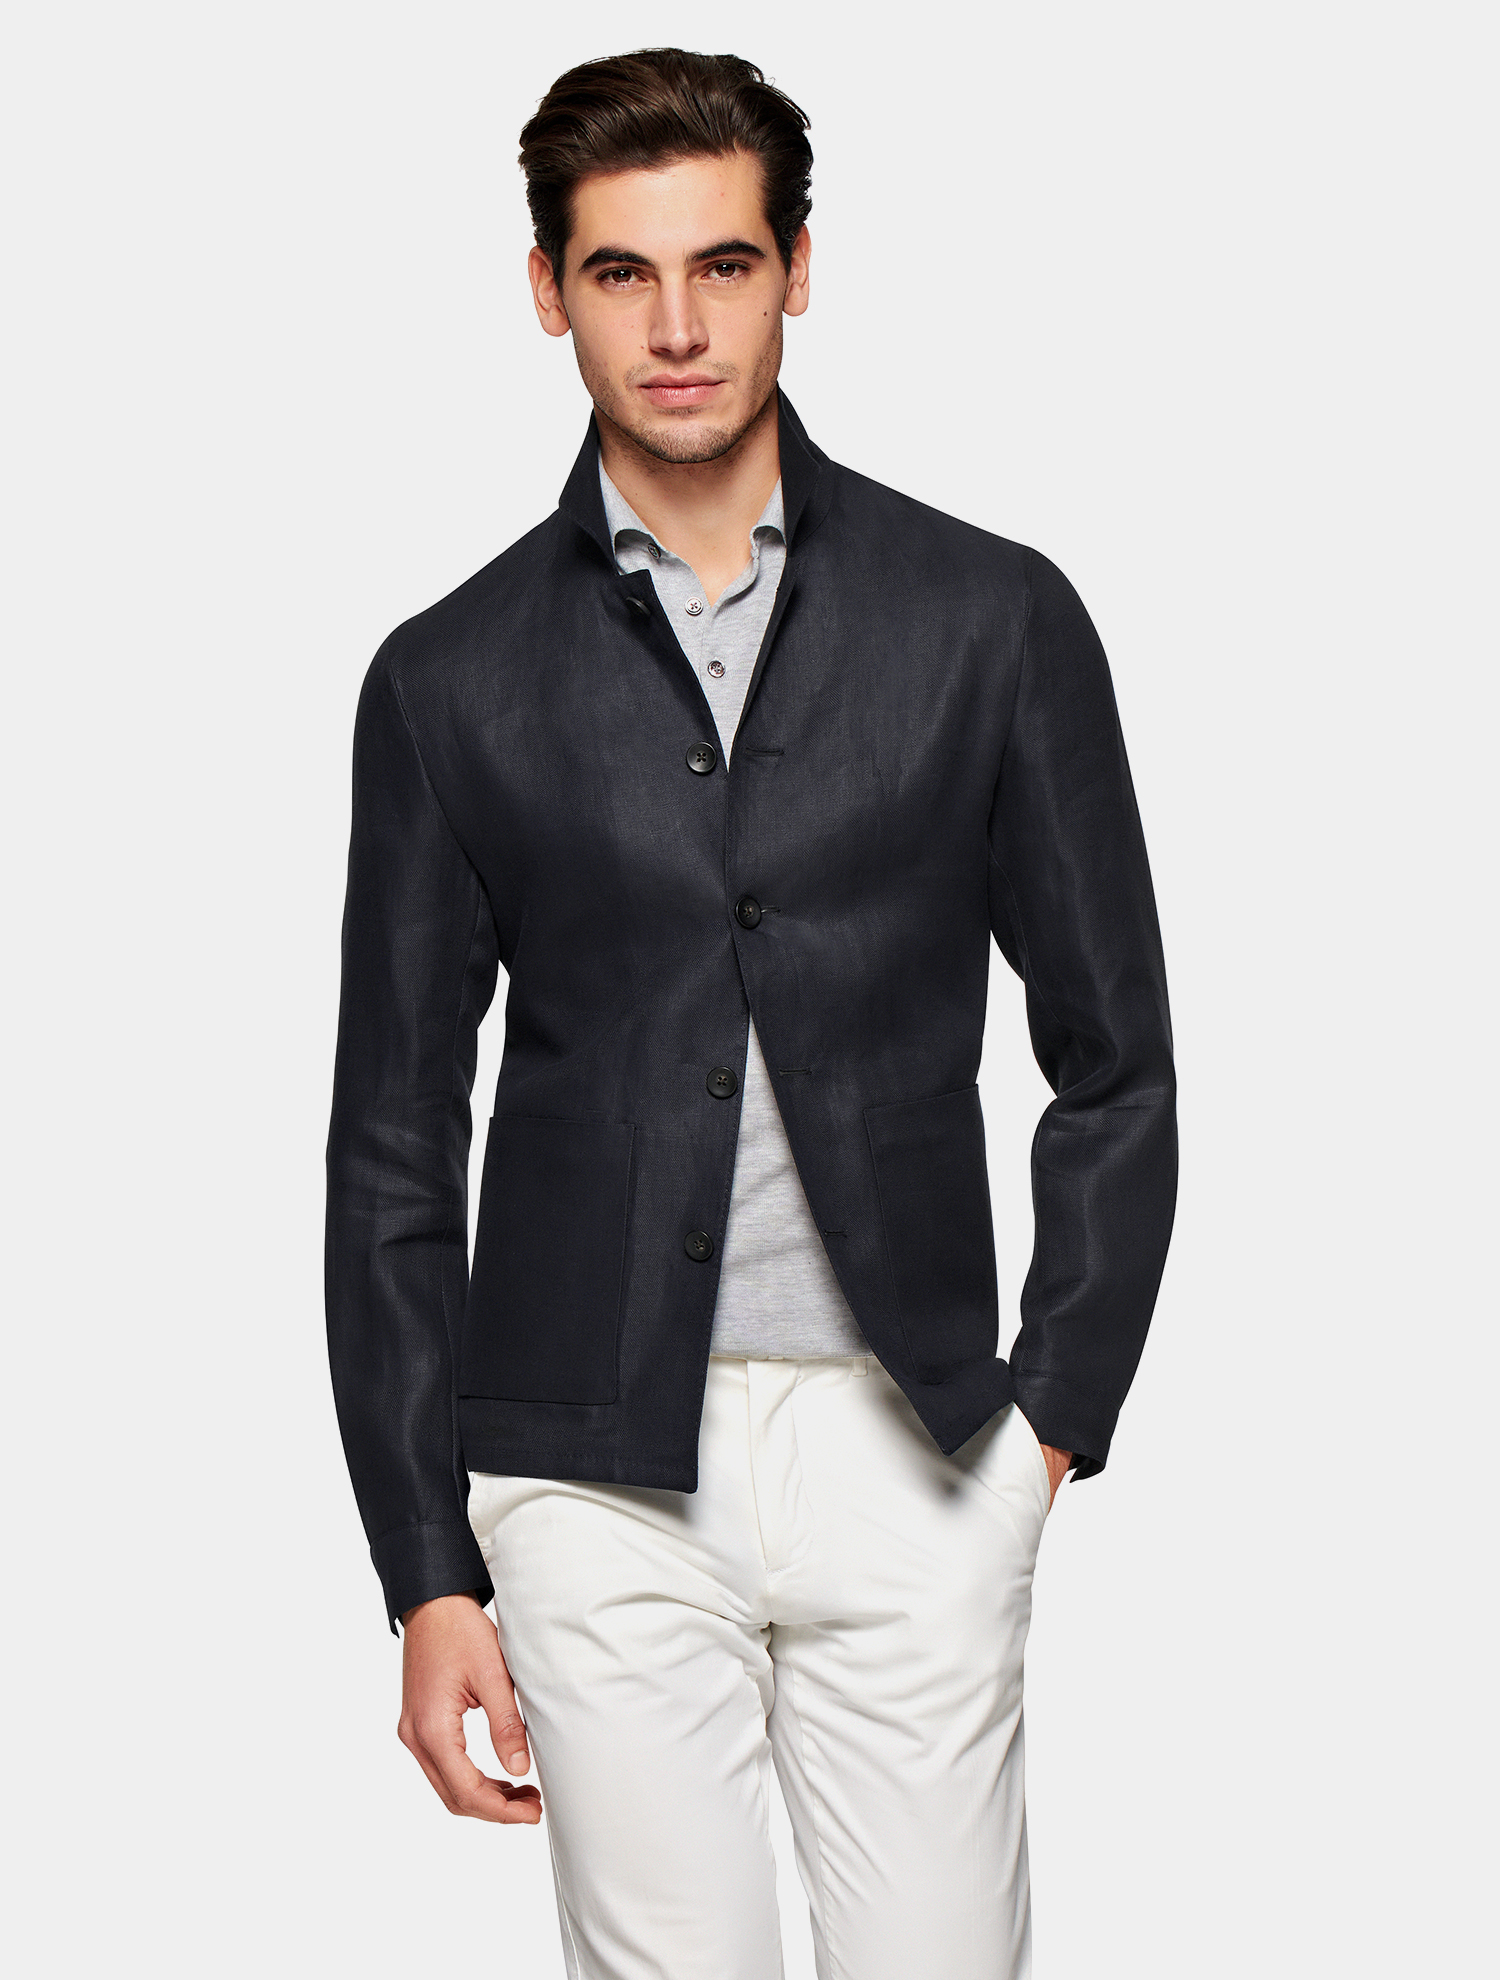 This spring and summer menswear will combine casual with formal ...